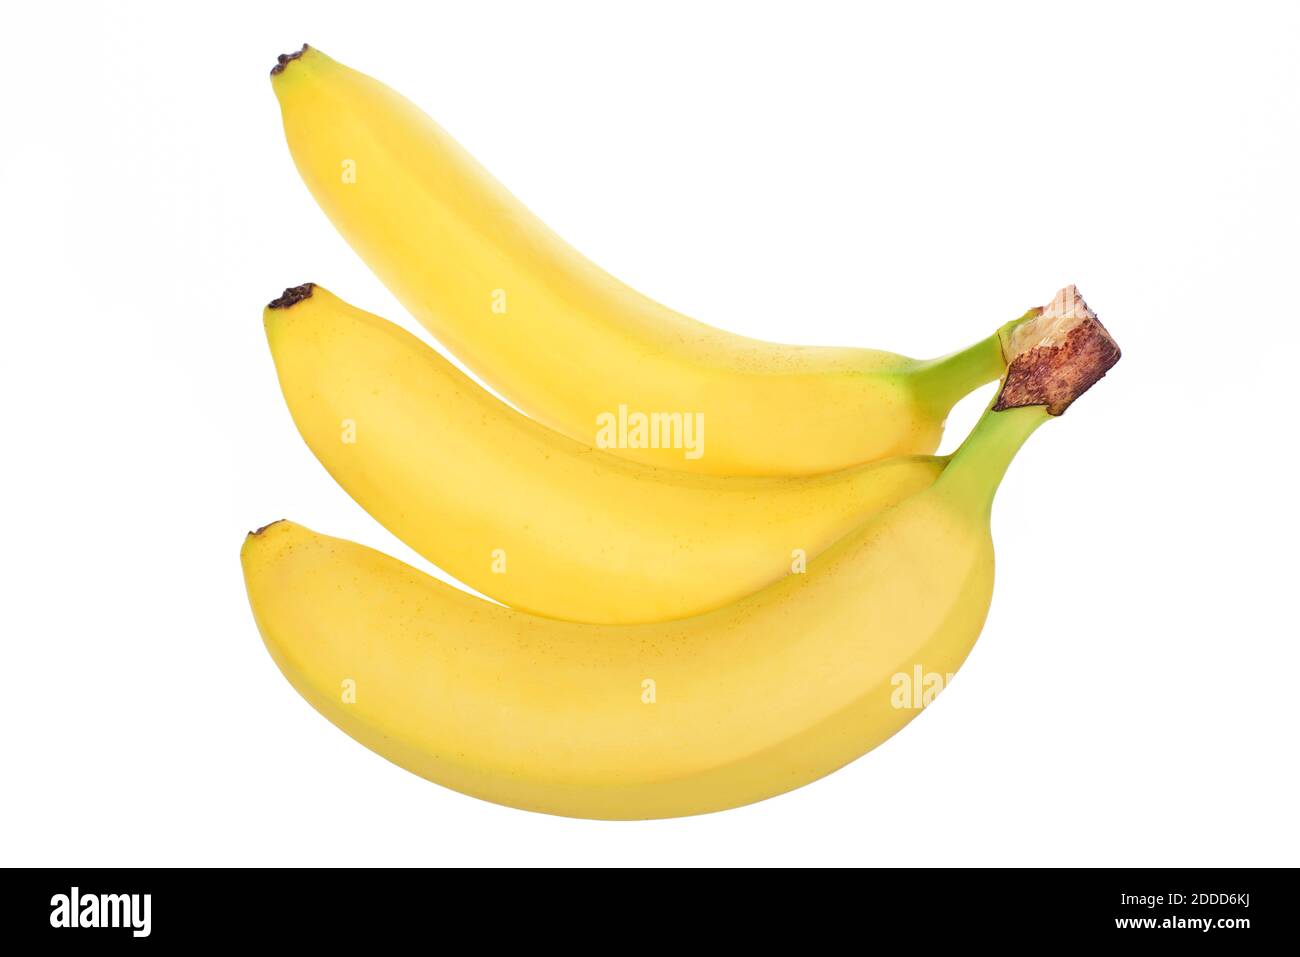 A bunch of bananas close-up view on white background Stock Photo - Alamy